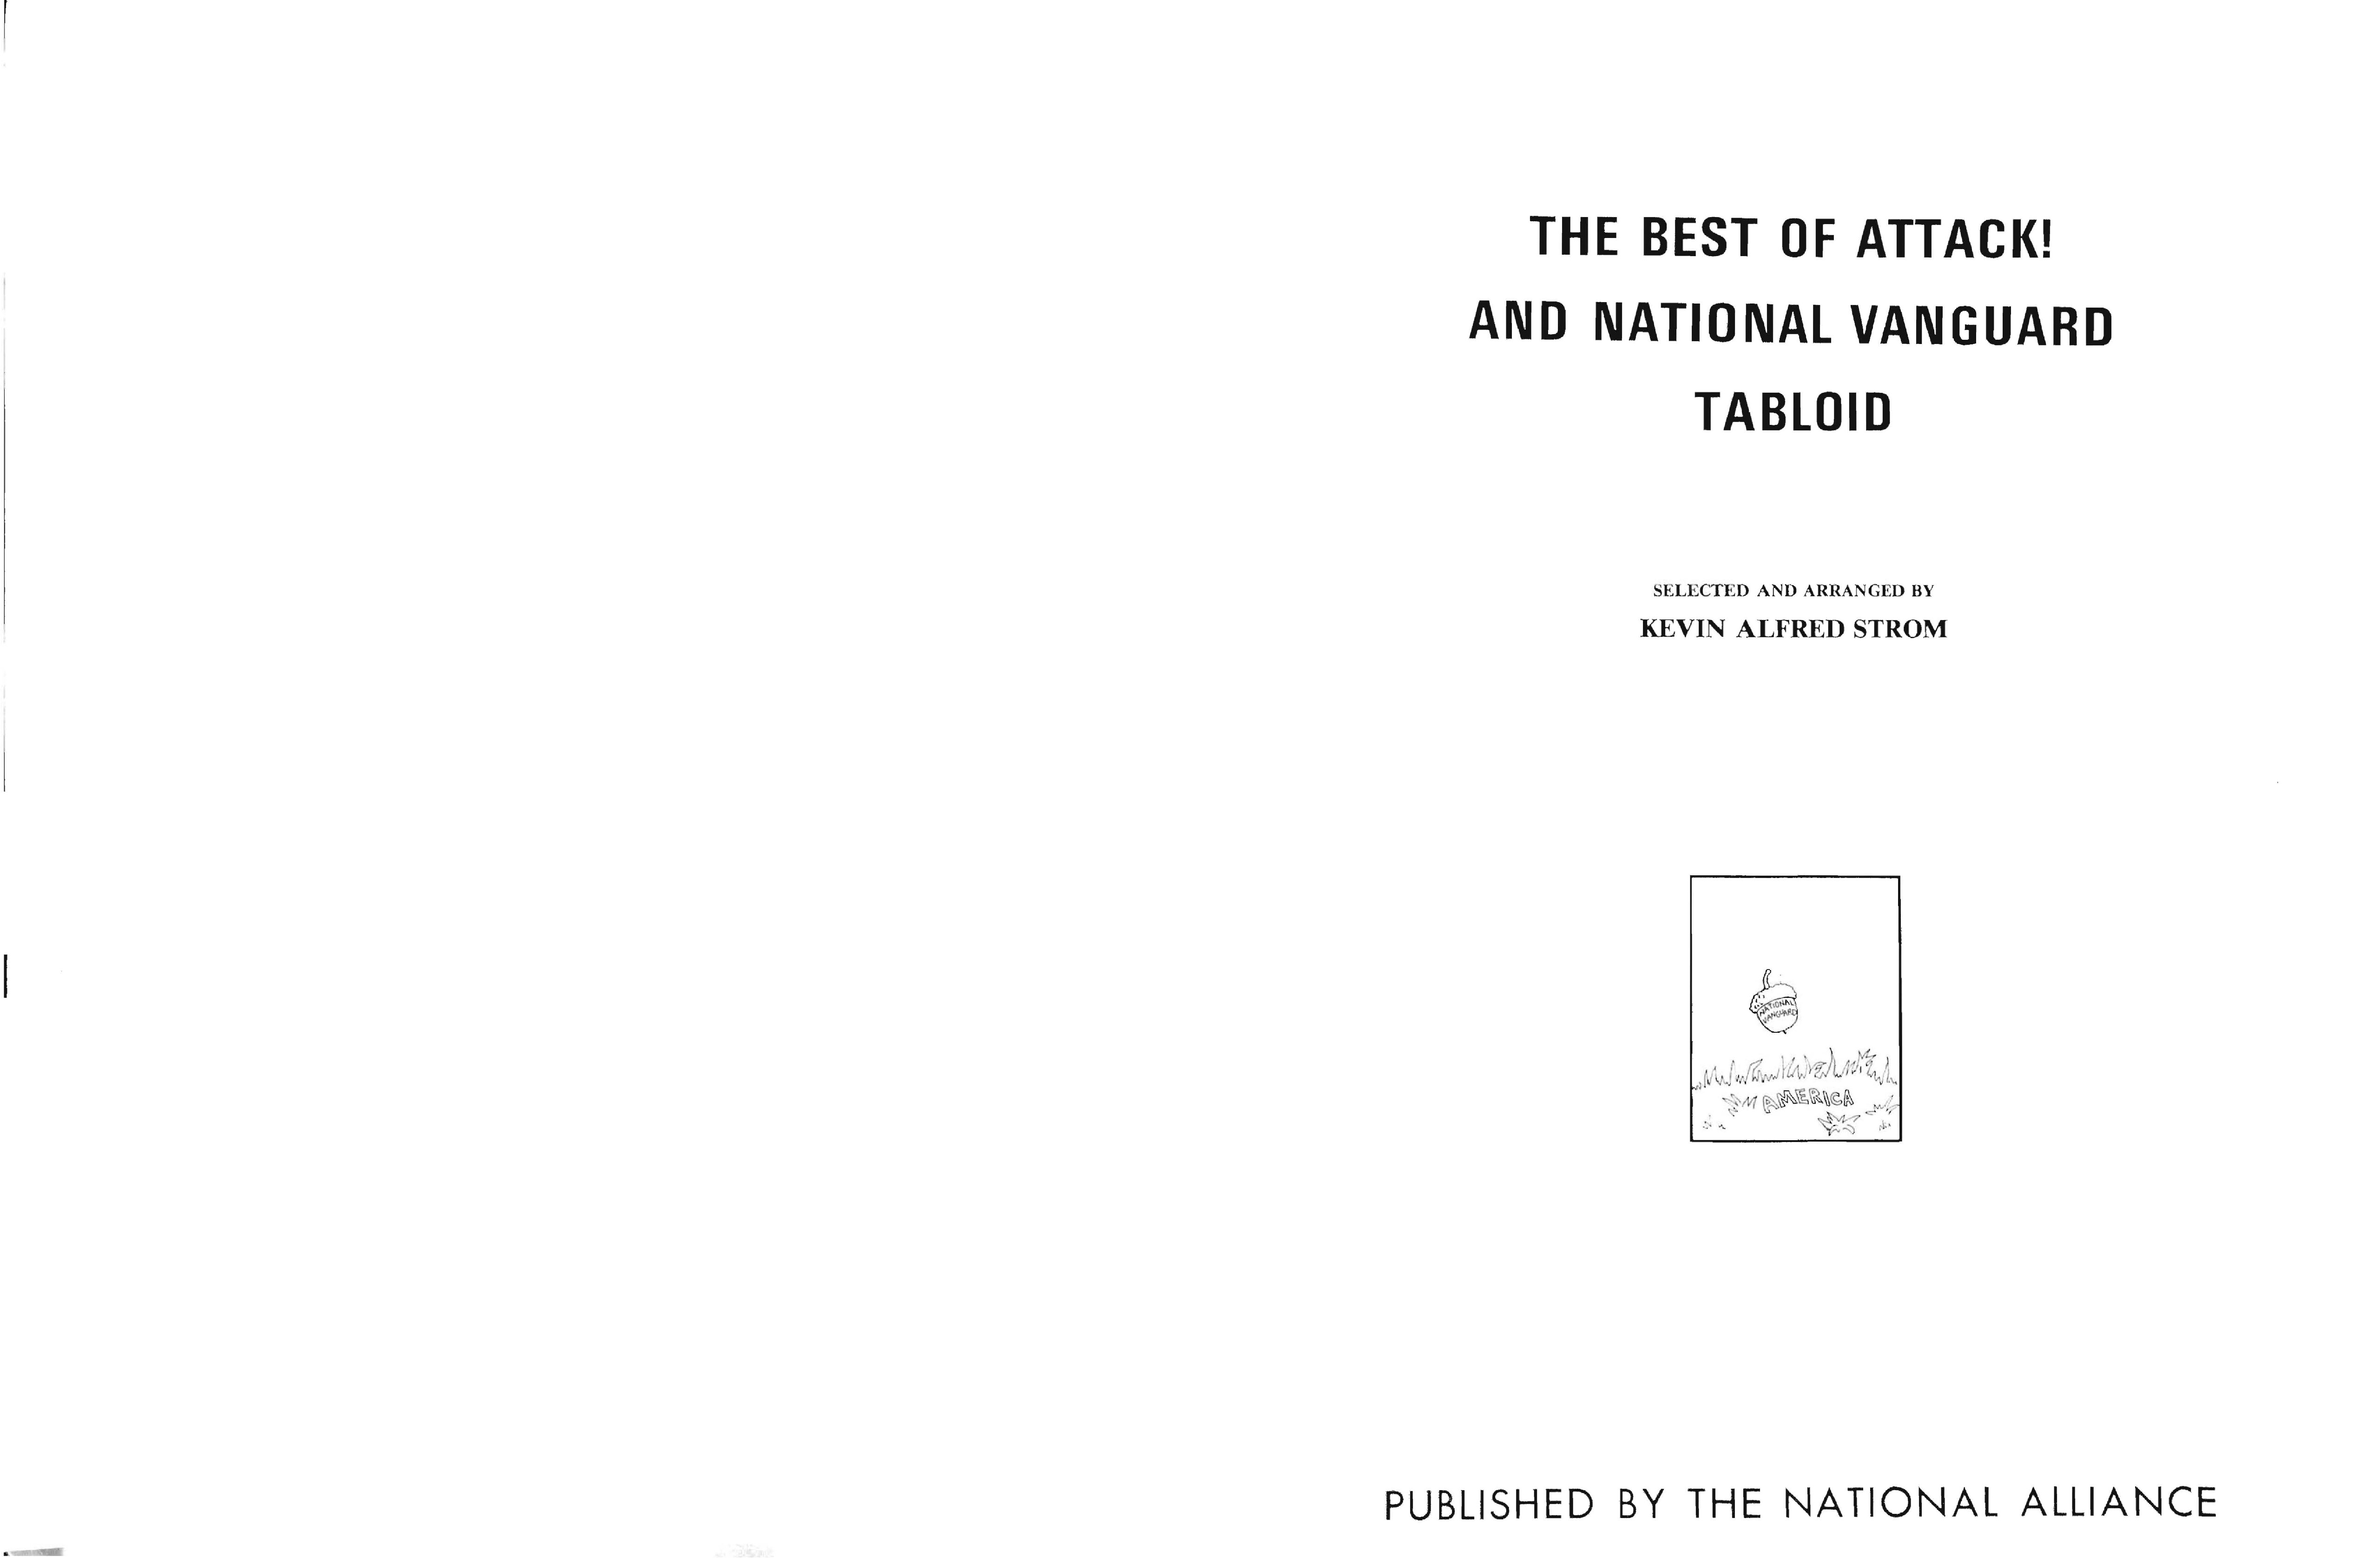 National Vanguard; The Best of Attack